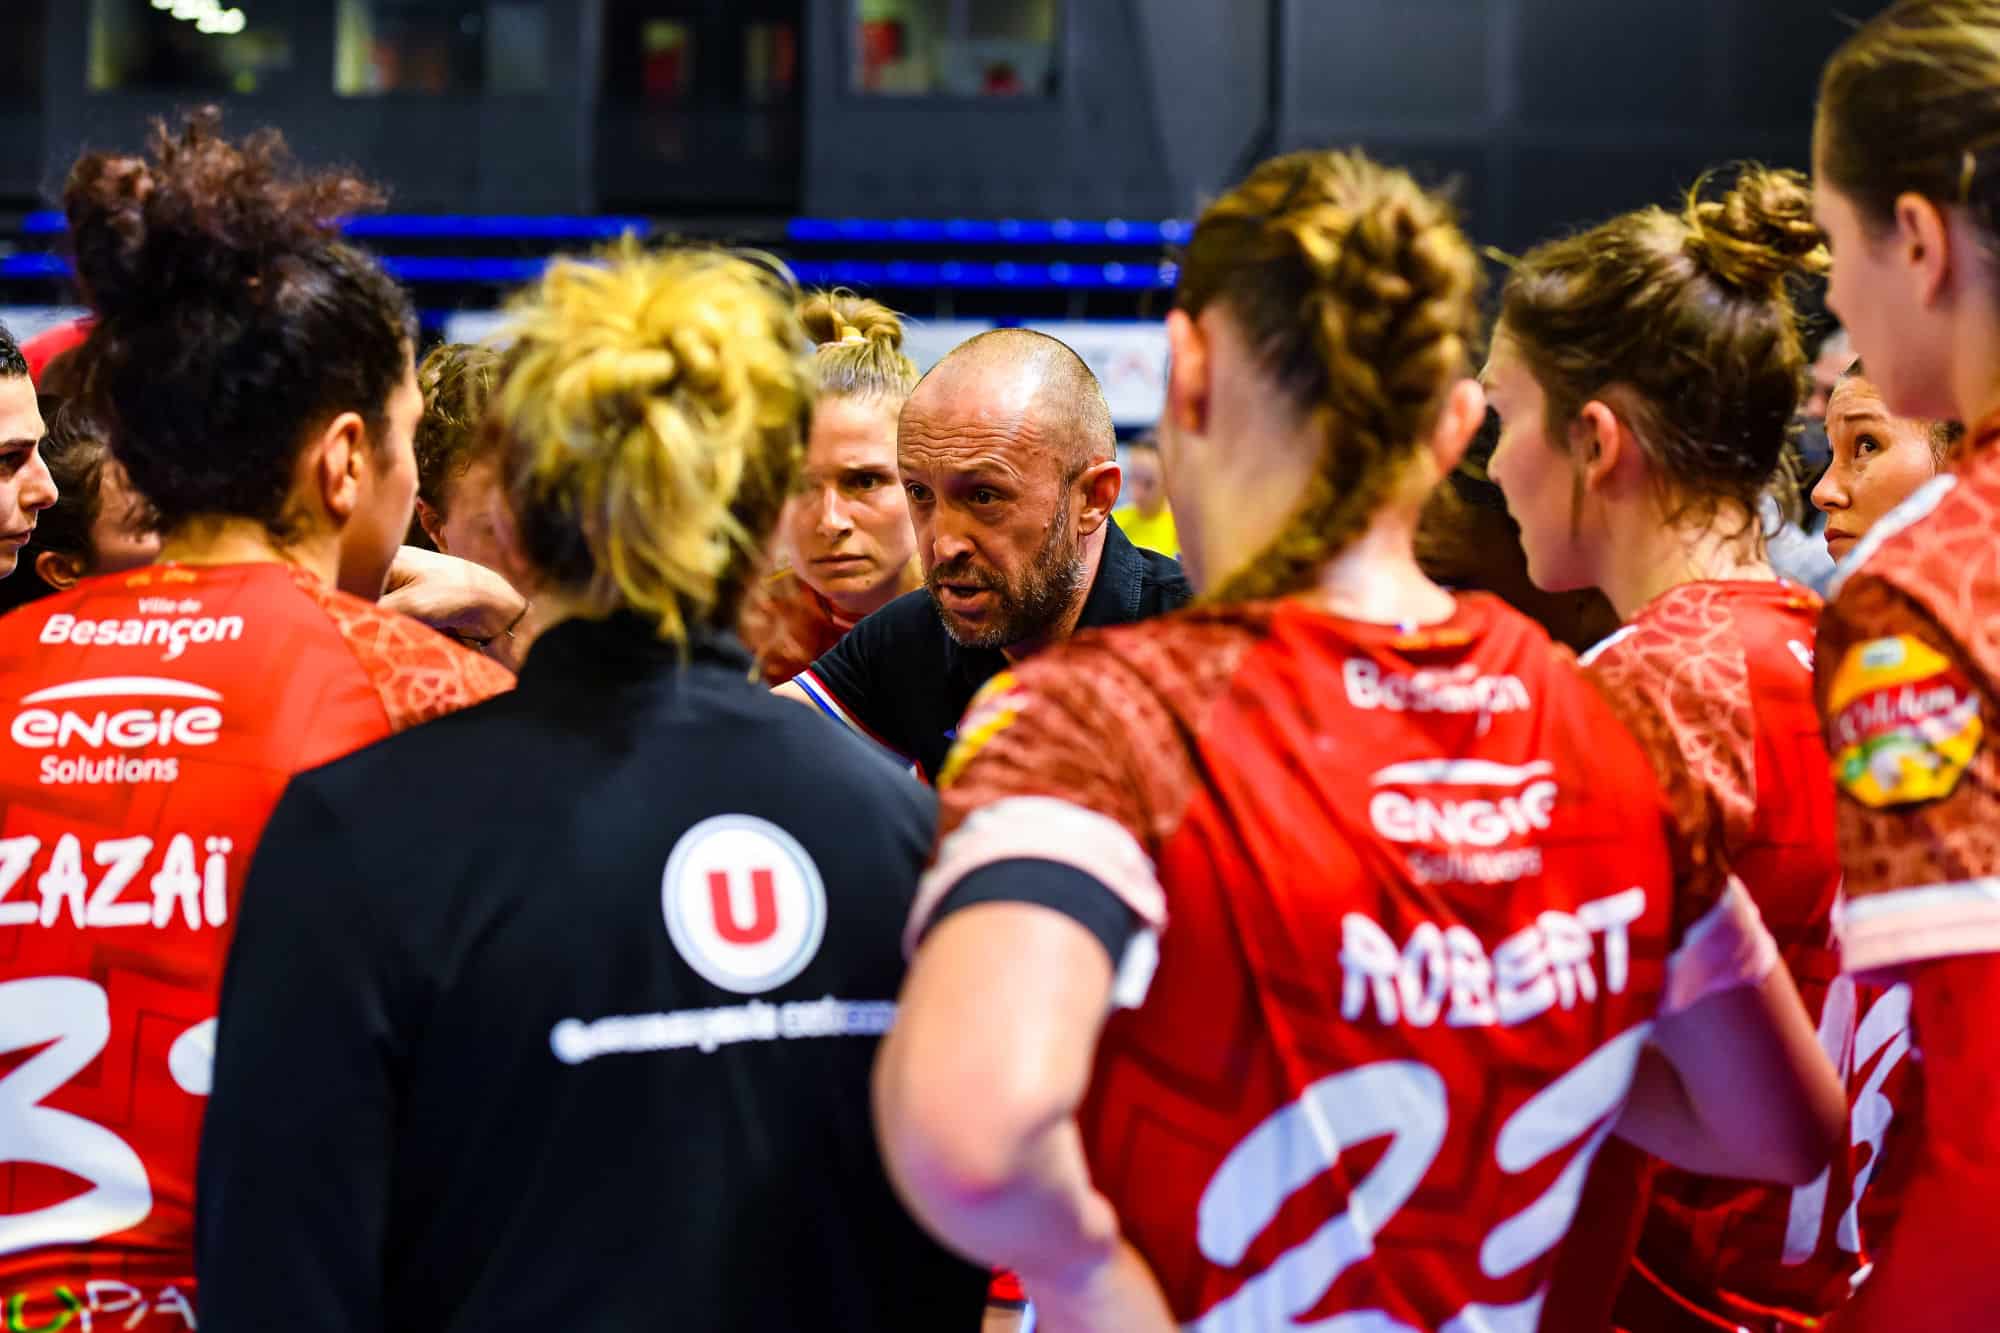 Sebastien MIZOULE head coach of Besancon speak to his players during the French Ligue Butagaz Energie women’s handball match between Besancon and Metz on February 2, 2022 in Besancon, France. (Photo by Baptiste Fernandez/Icon Sport)